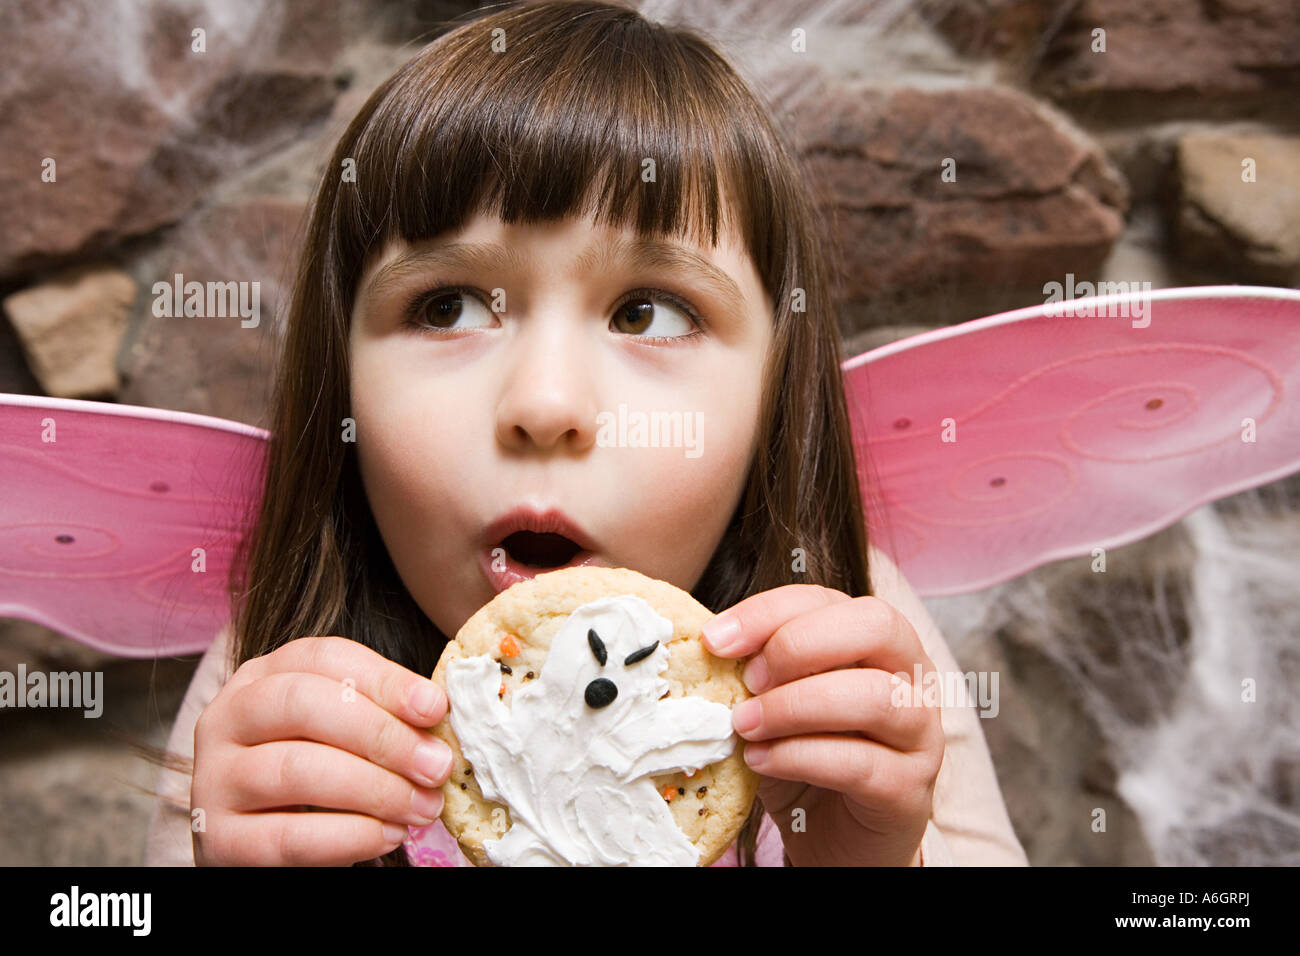 Girl holding a halloween cookie Stock Photo